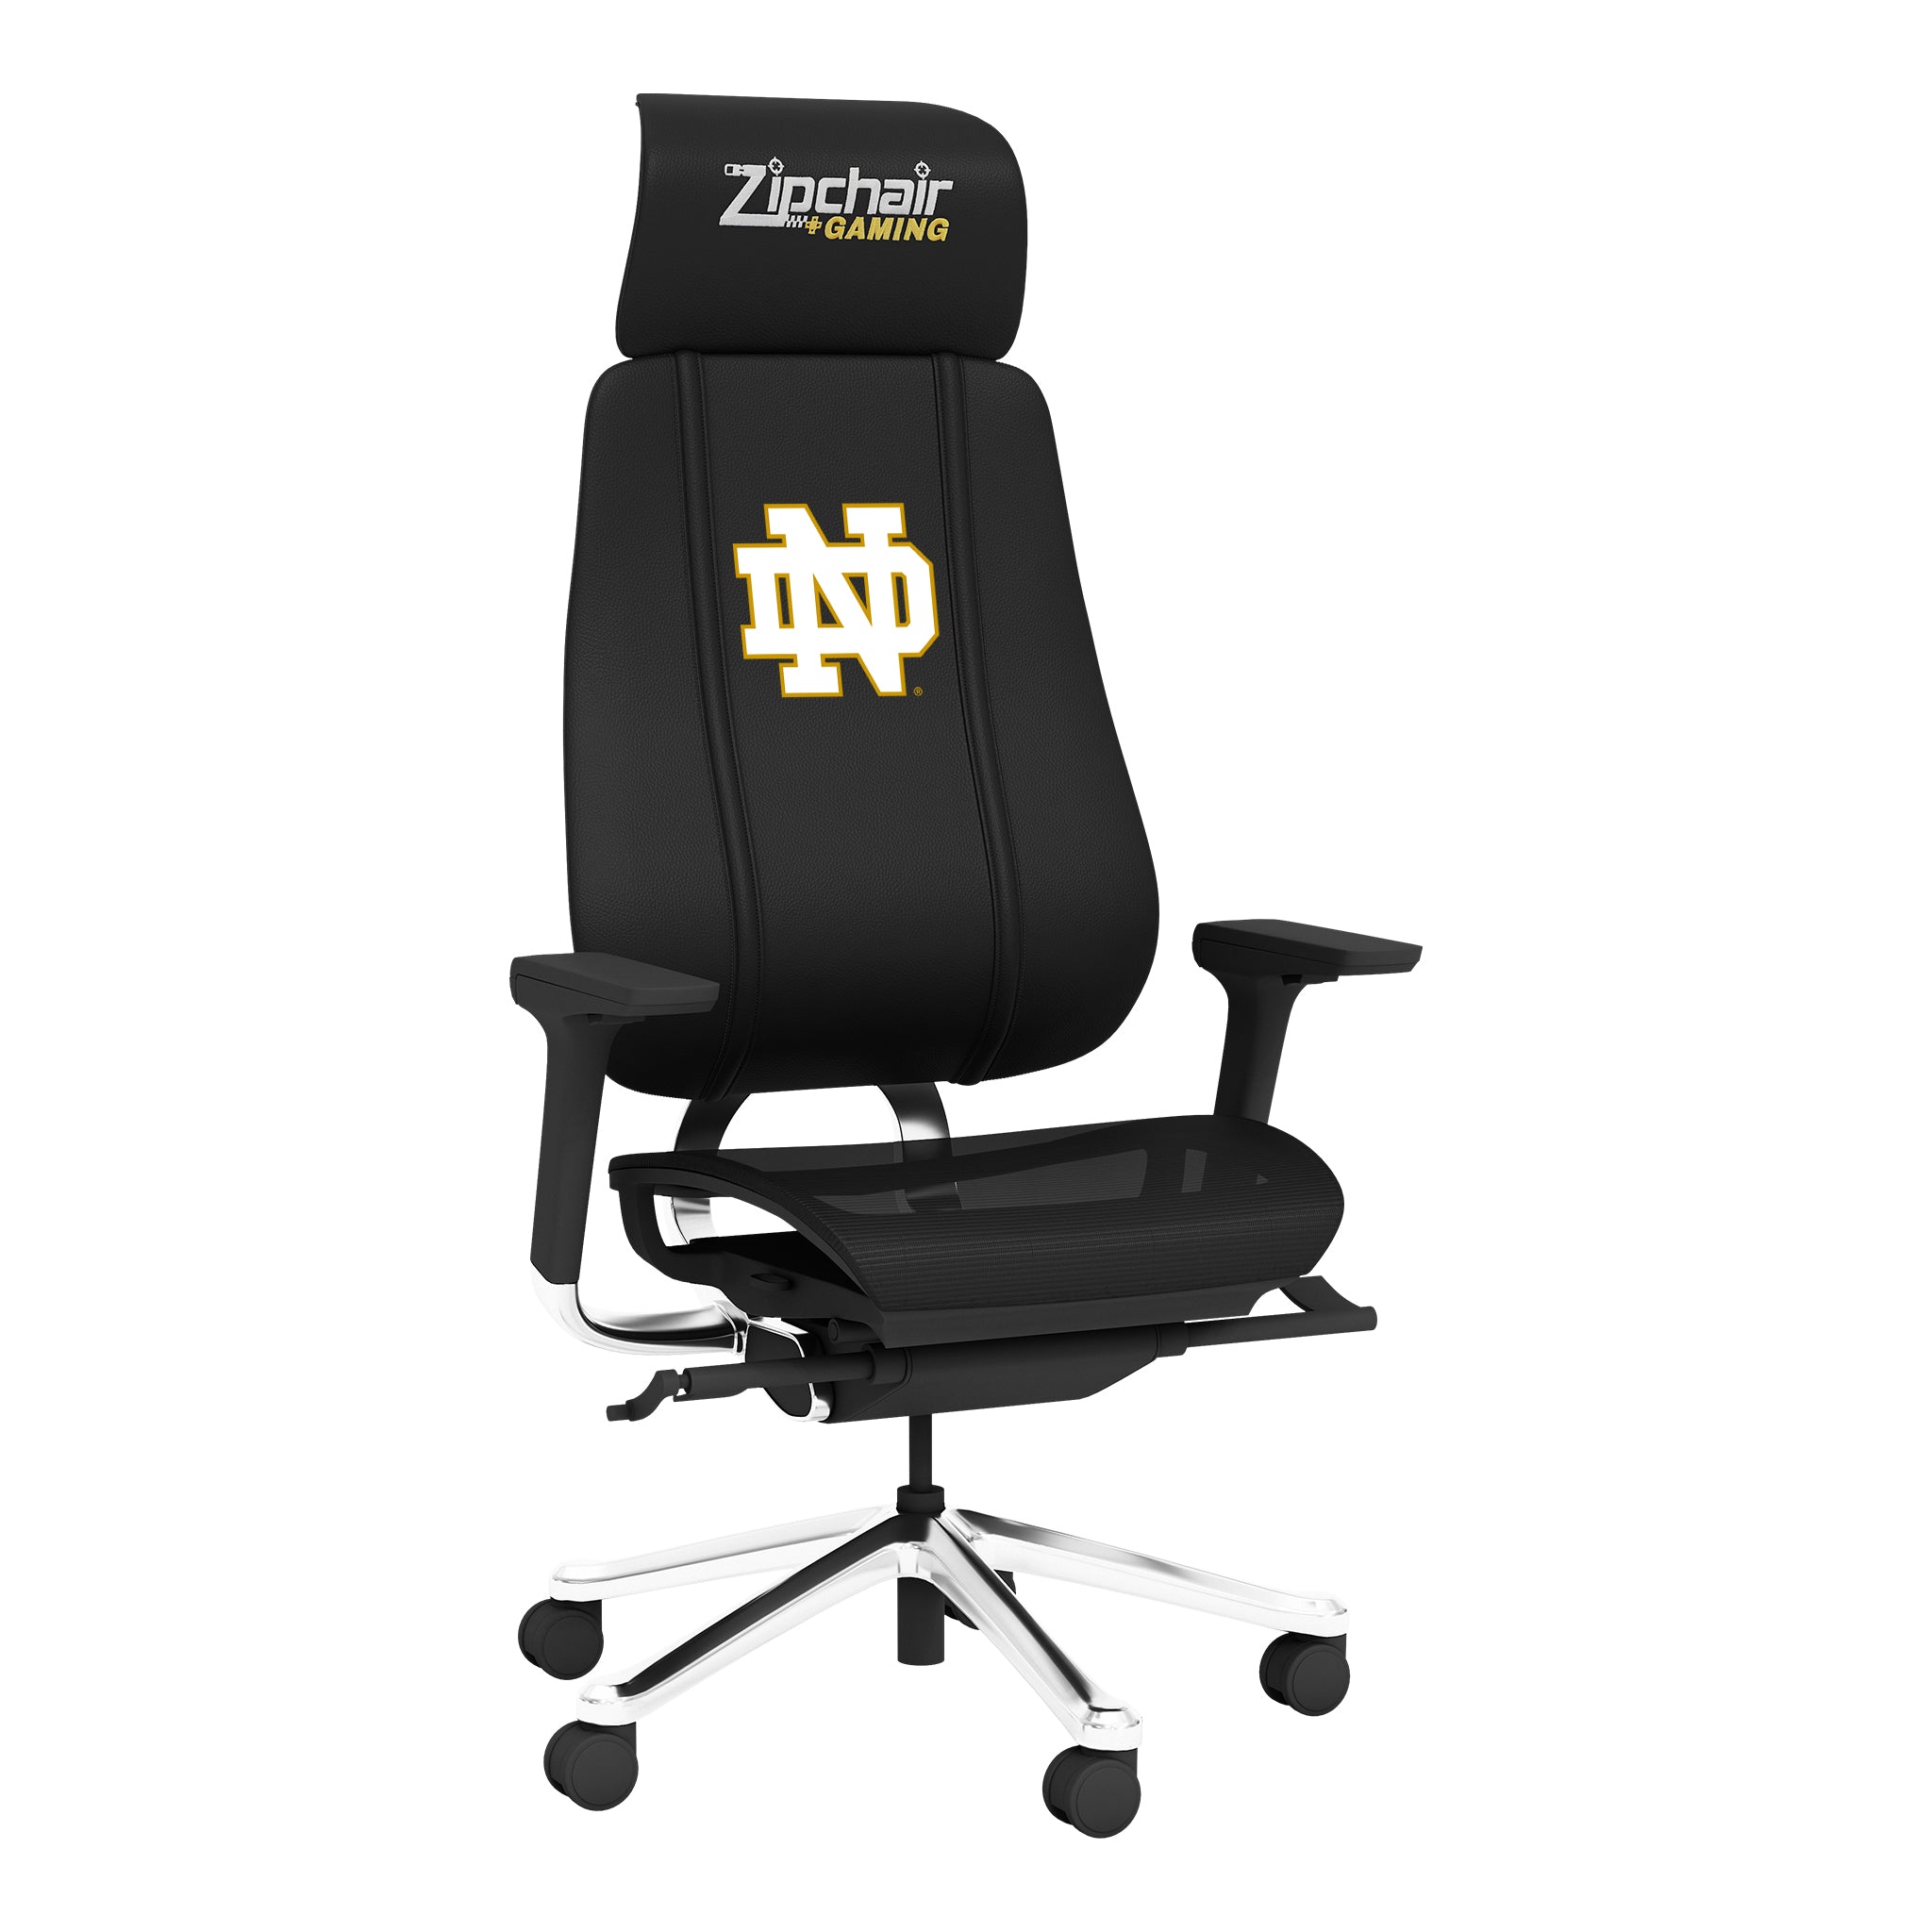 Notre Dame PhantomX Mesh Gaming Chair with Notre Dame Secondary Logo